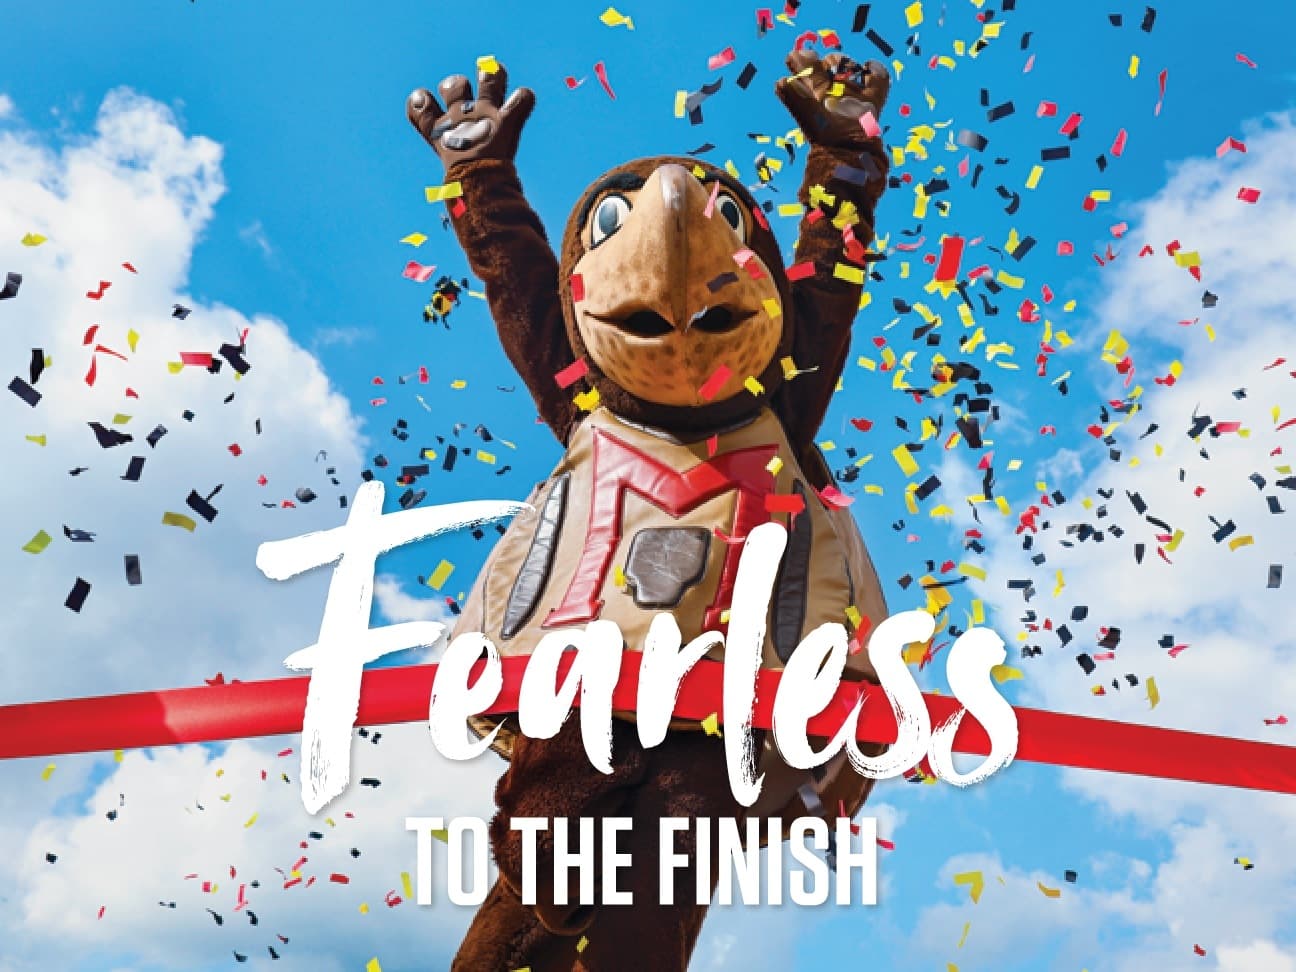 Cover of the Giving Newsletter November 2021 edition with the headline 'Fearless to the Finish' and a Testudo mascot jumping through a finish line as confetti falls around